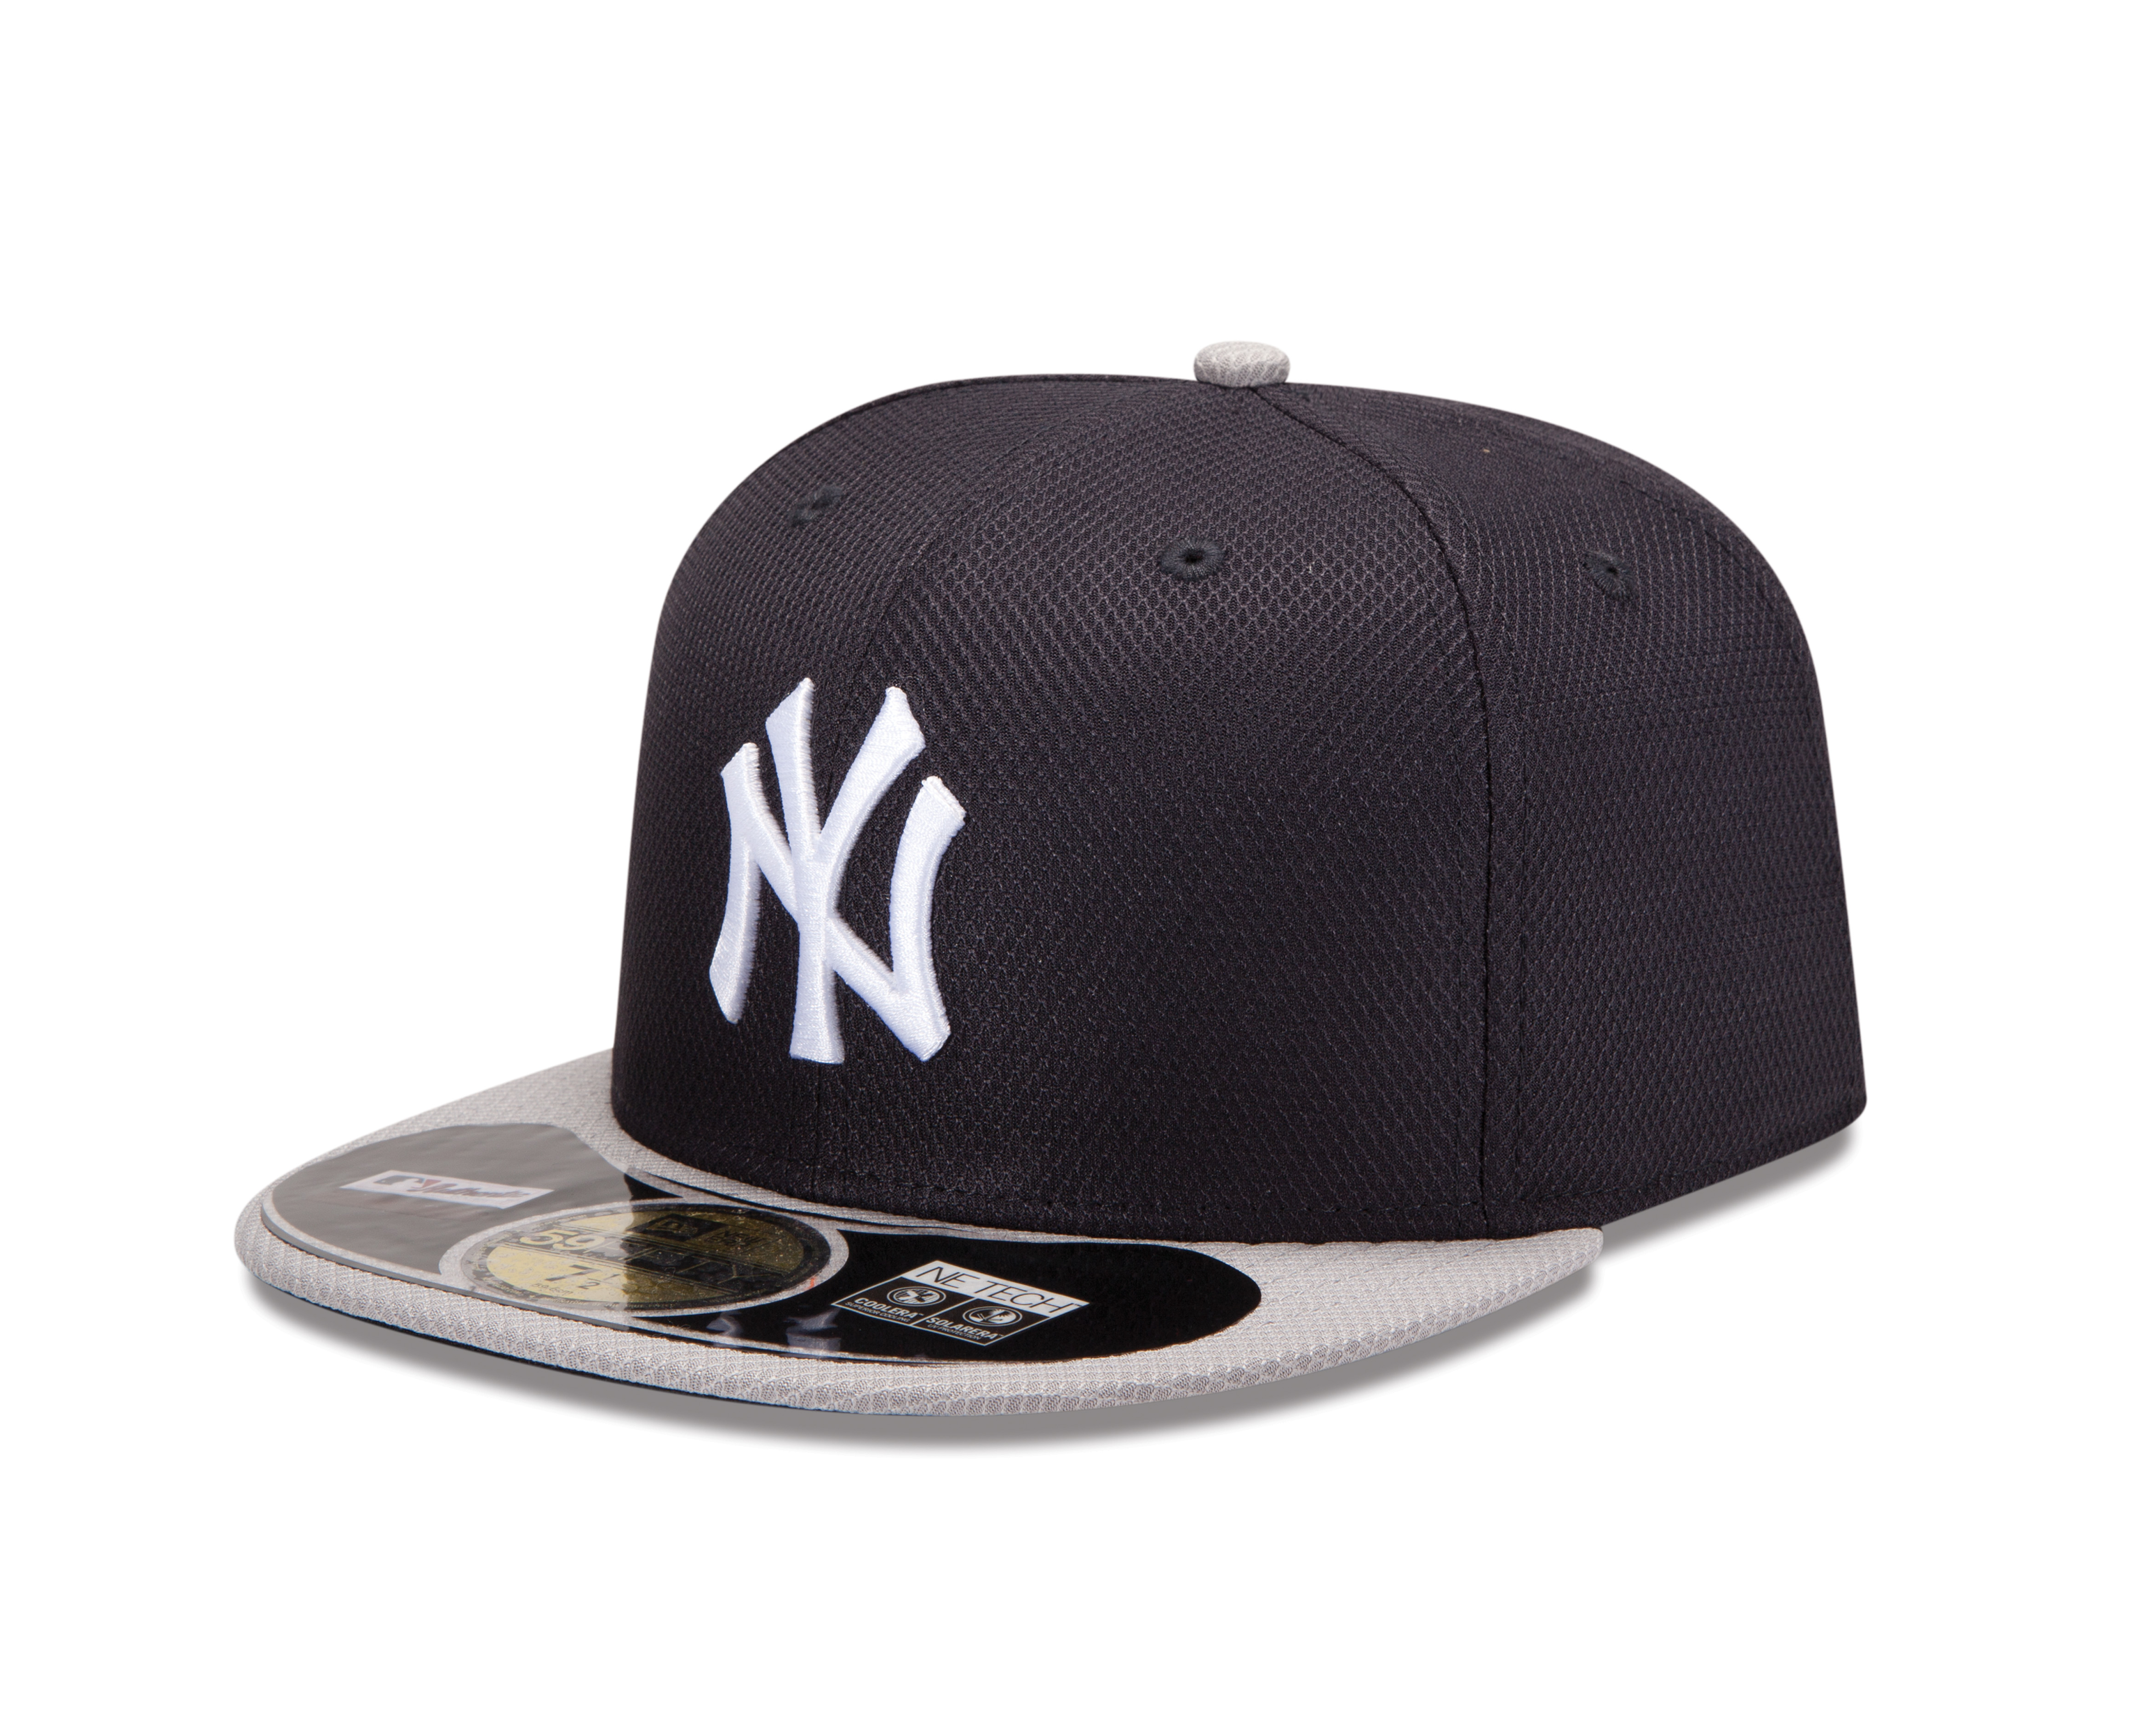 yankee hat with no brim - Clip Art Library